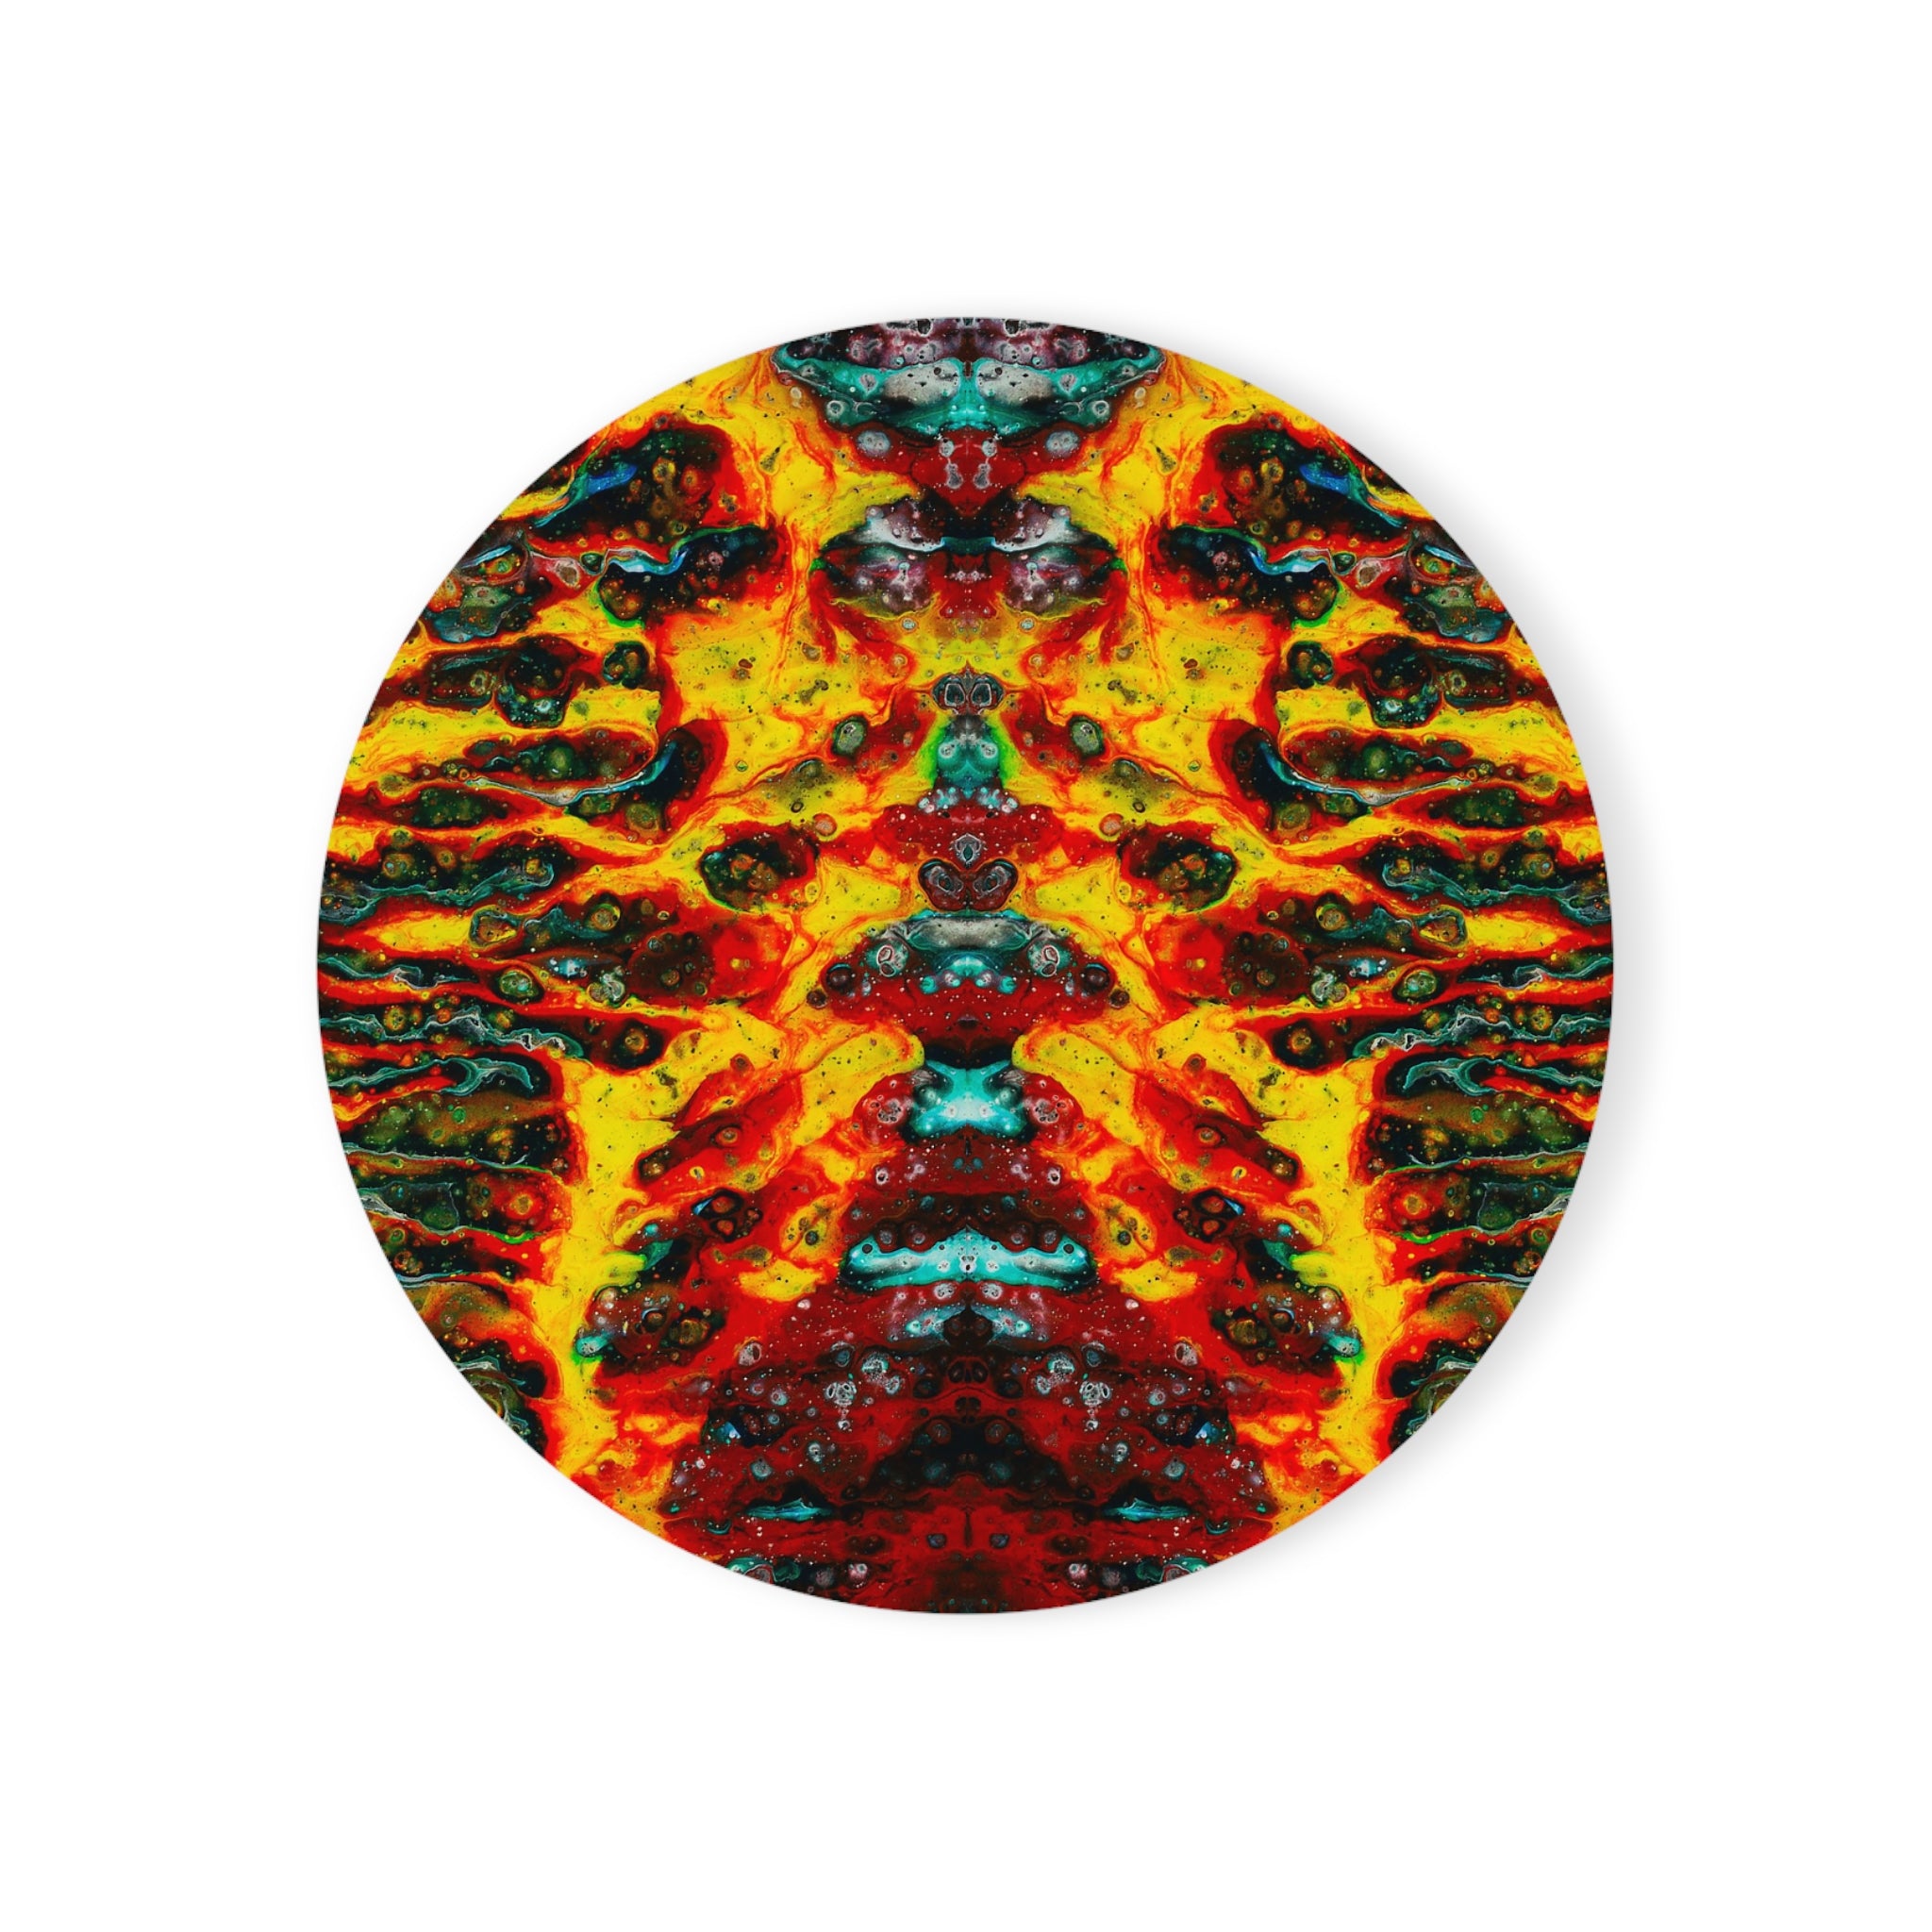 Cameron Creations - Floating Flames - Stylish Coffee Coaster - Circle Front